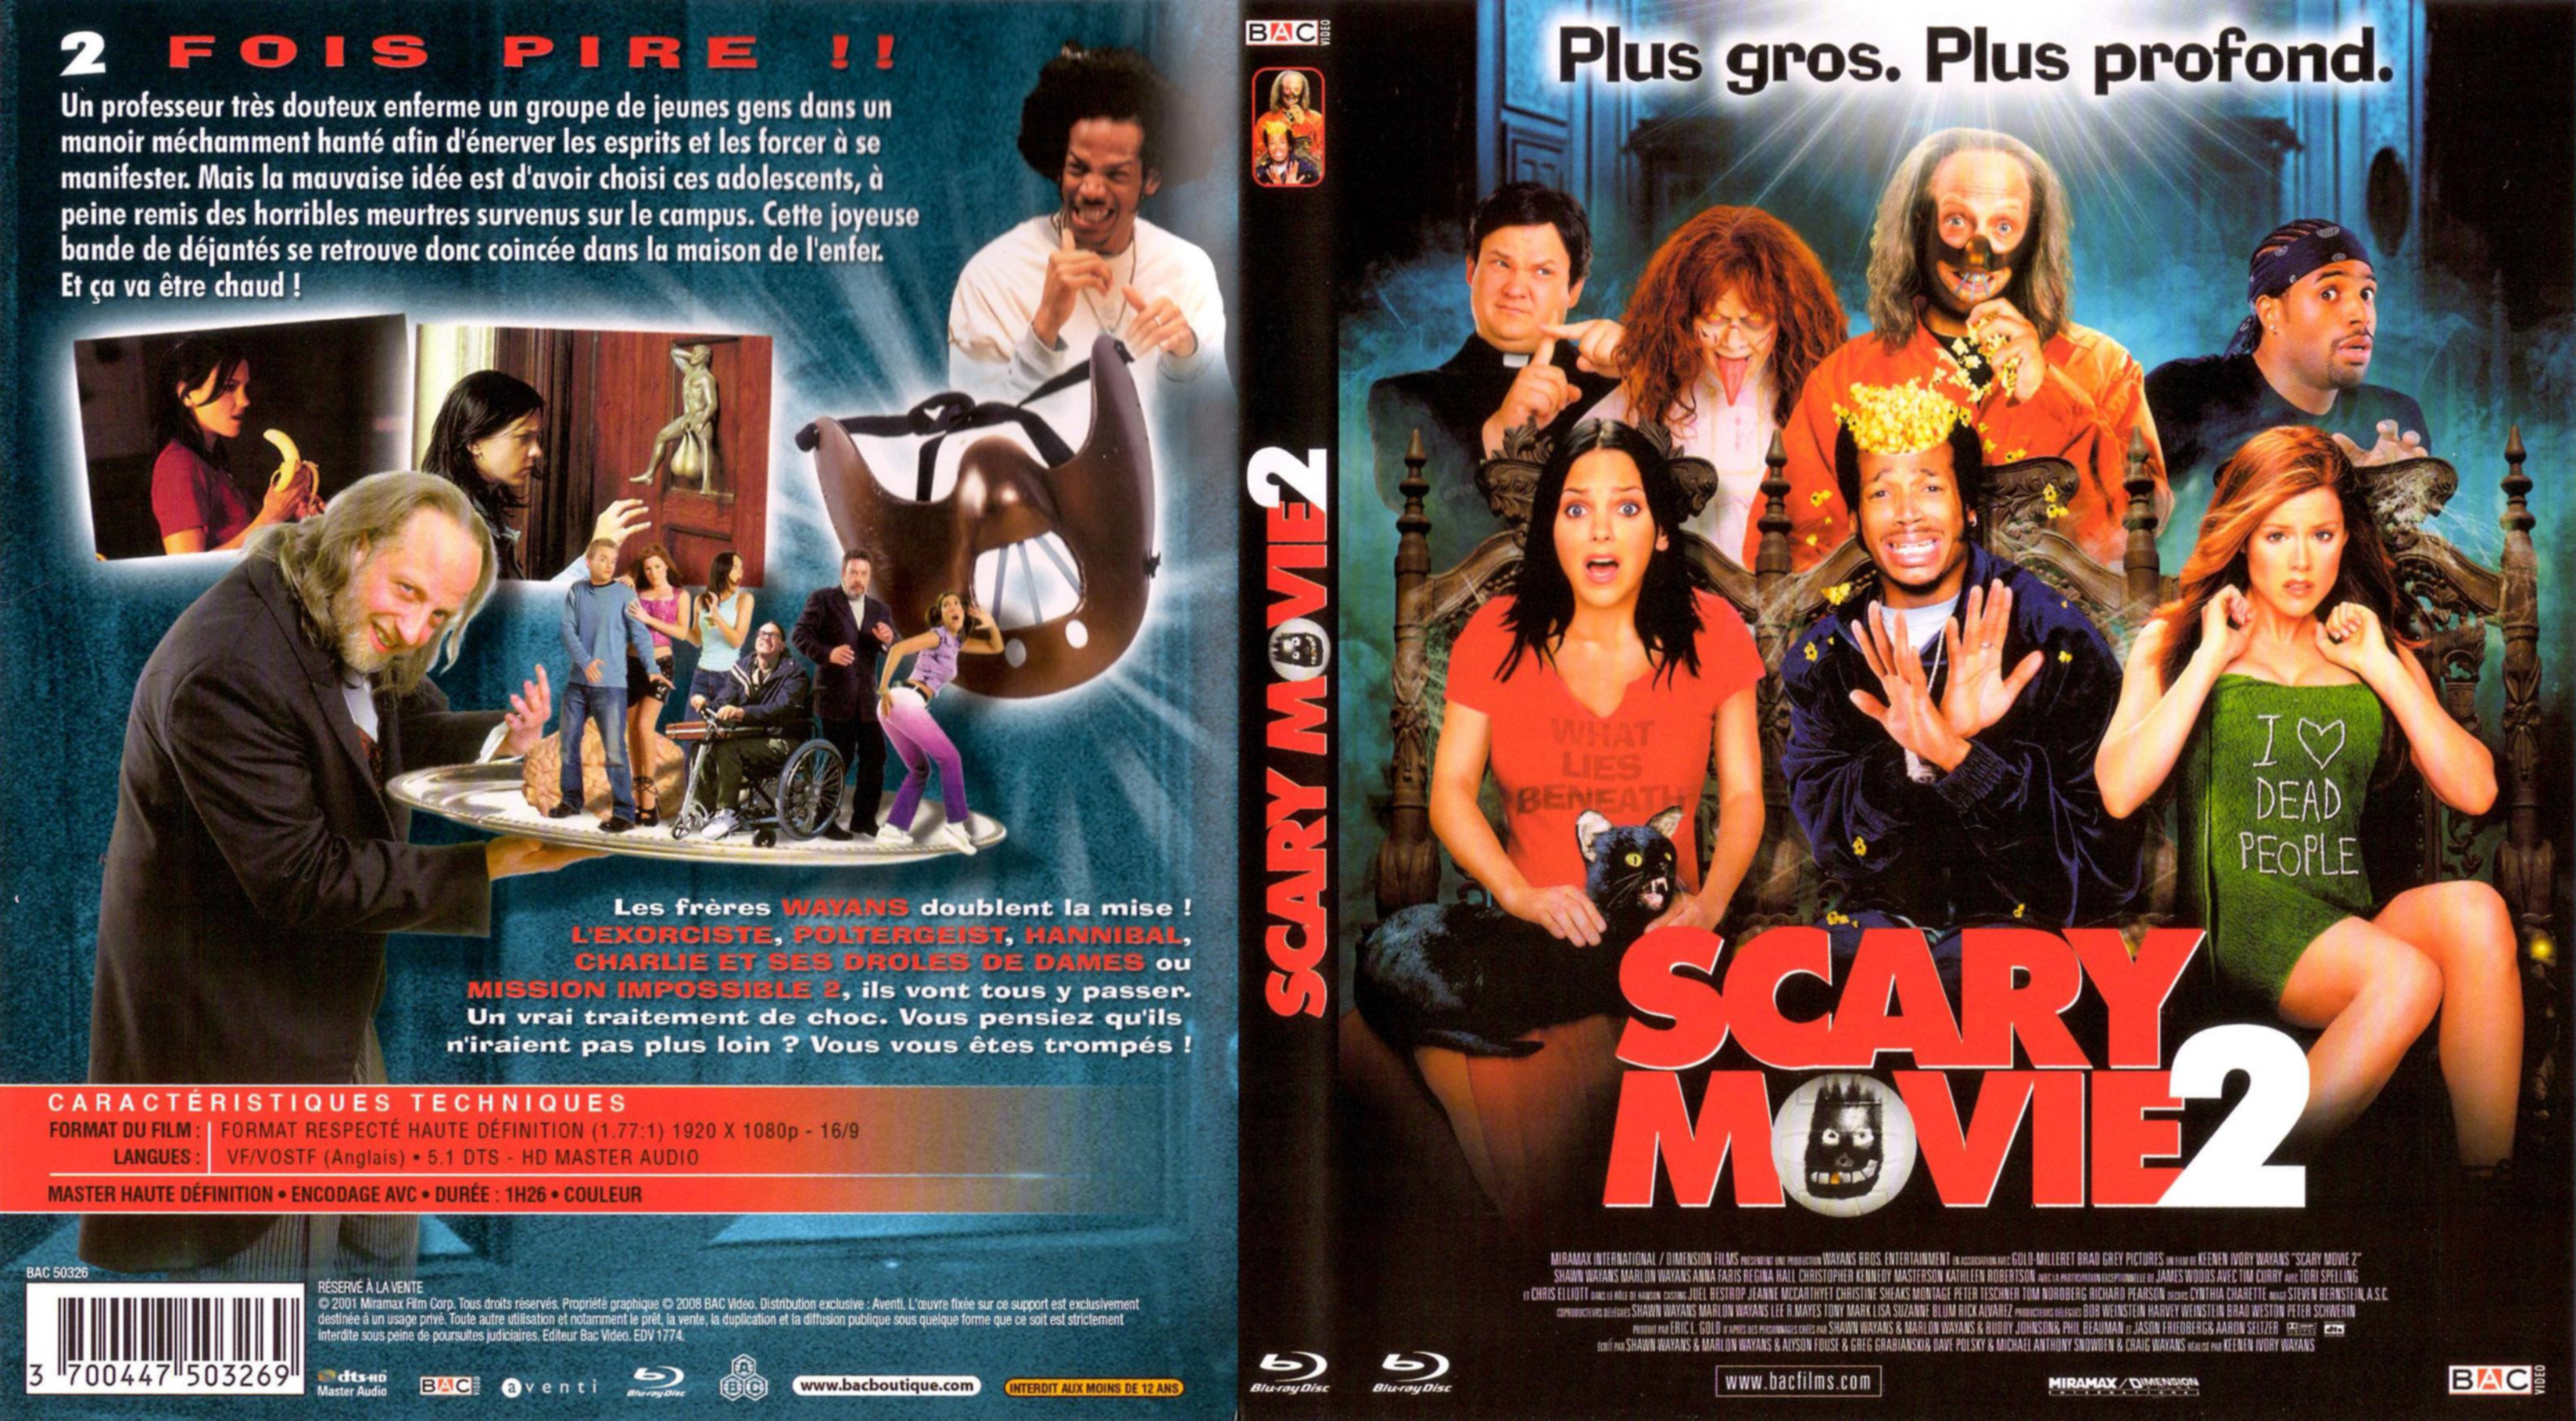 Jaquette DVD Scary movie 2 (BLU-RAY)